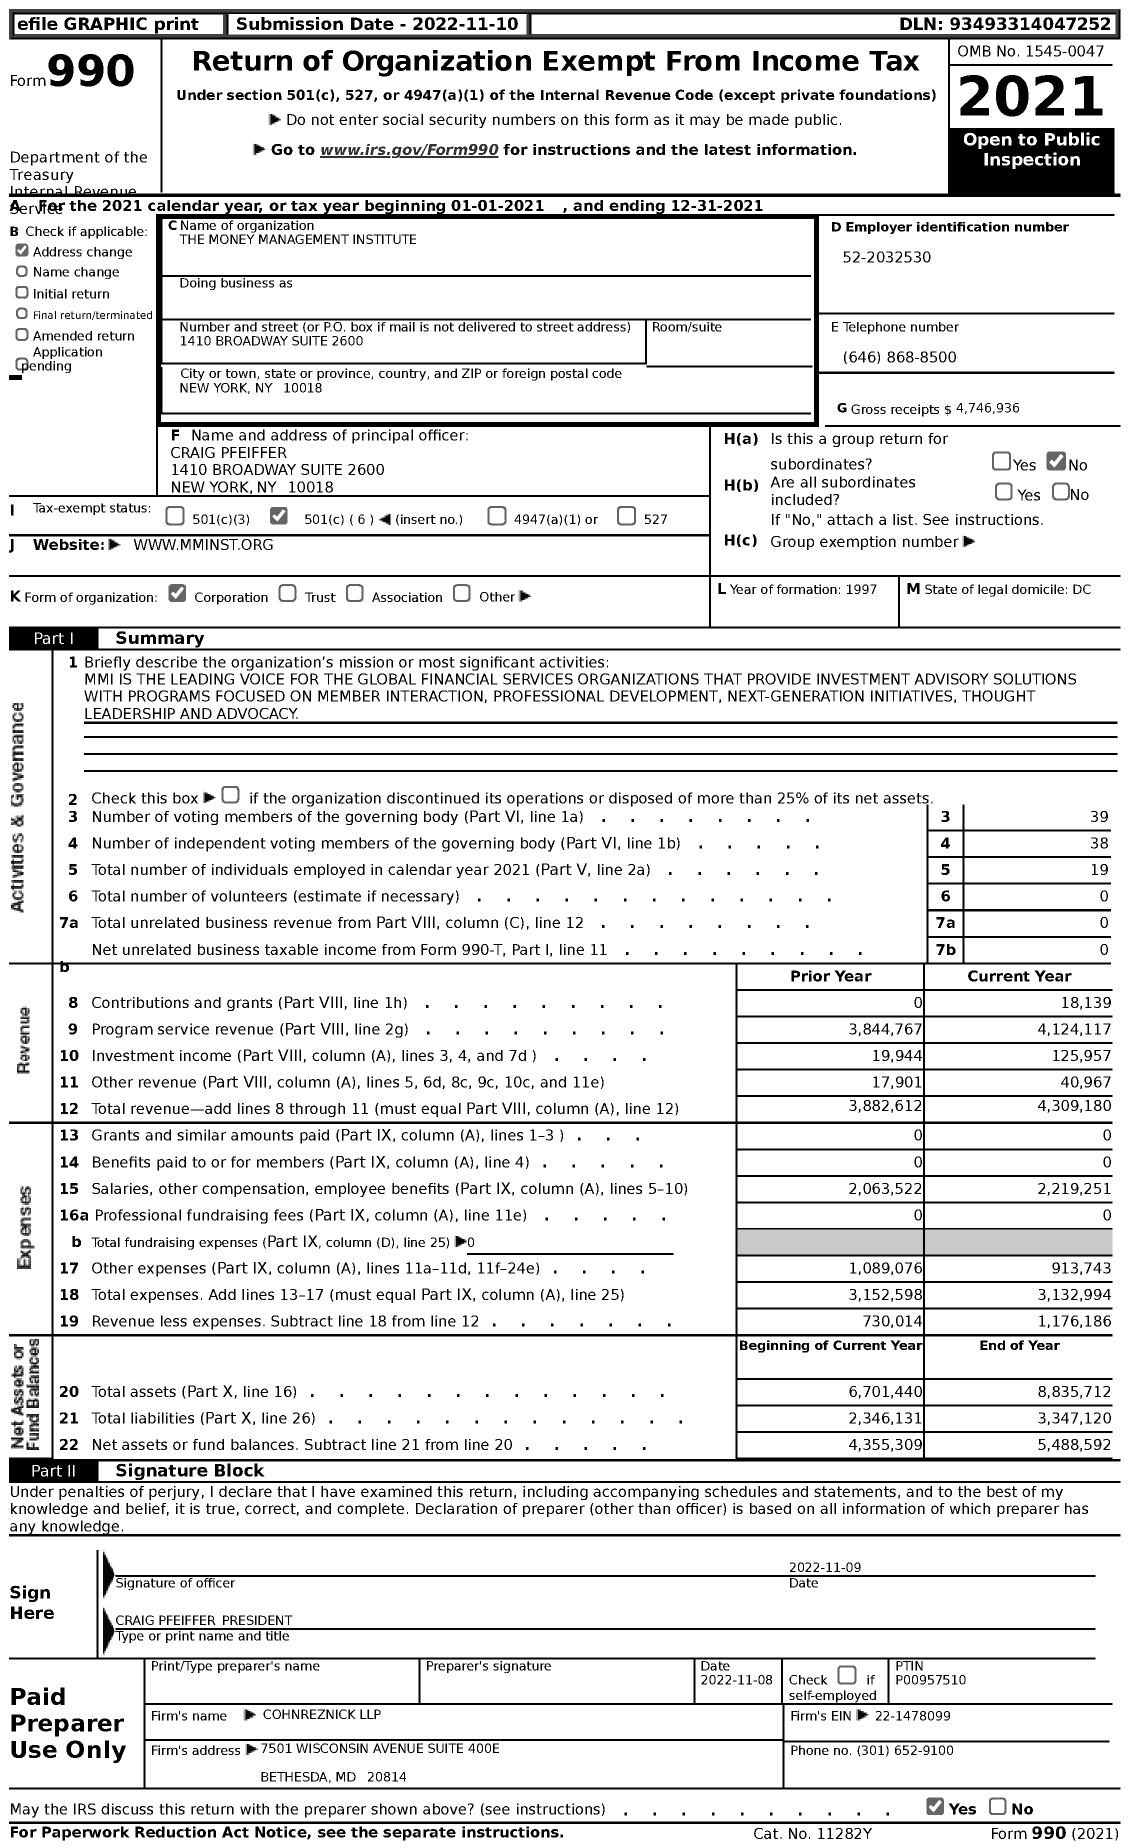 Image of first page of 2021 Form 990 for Money Management Institute (MMI)